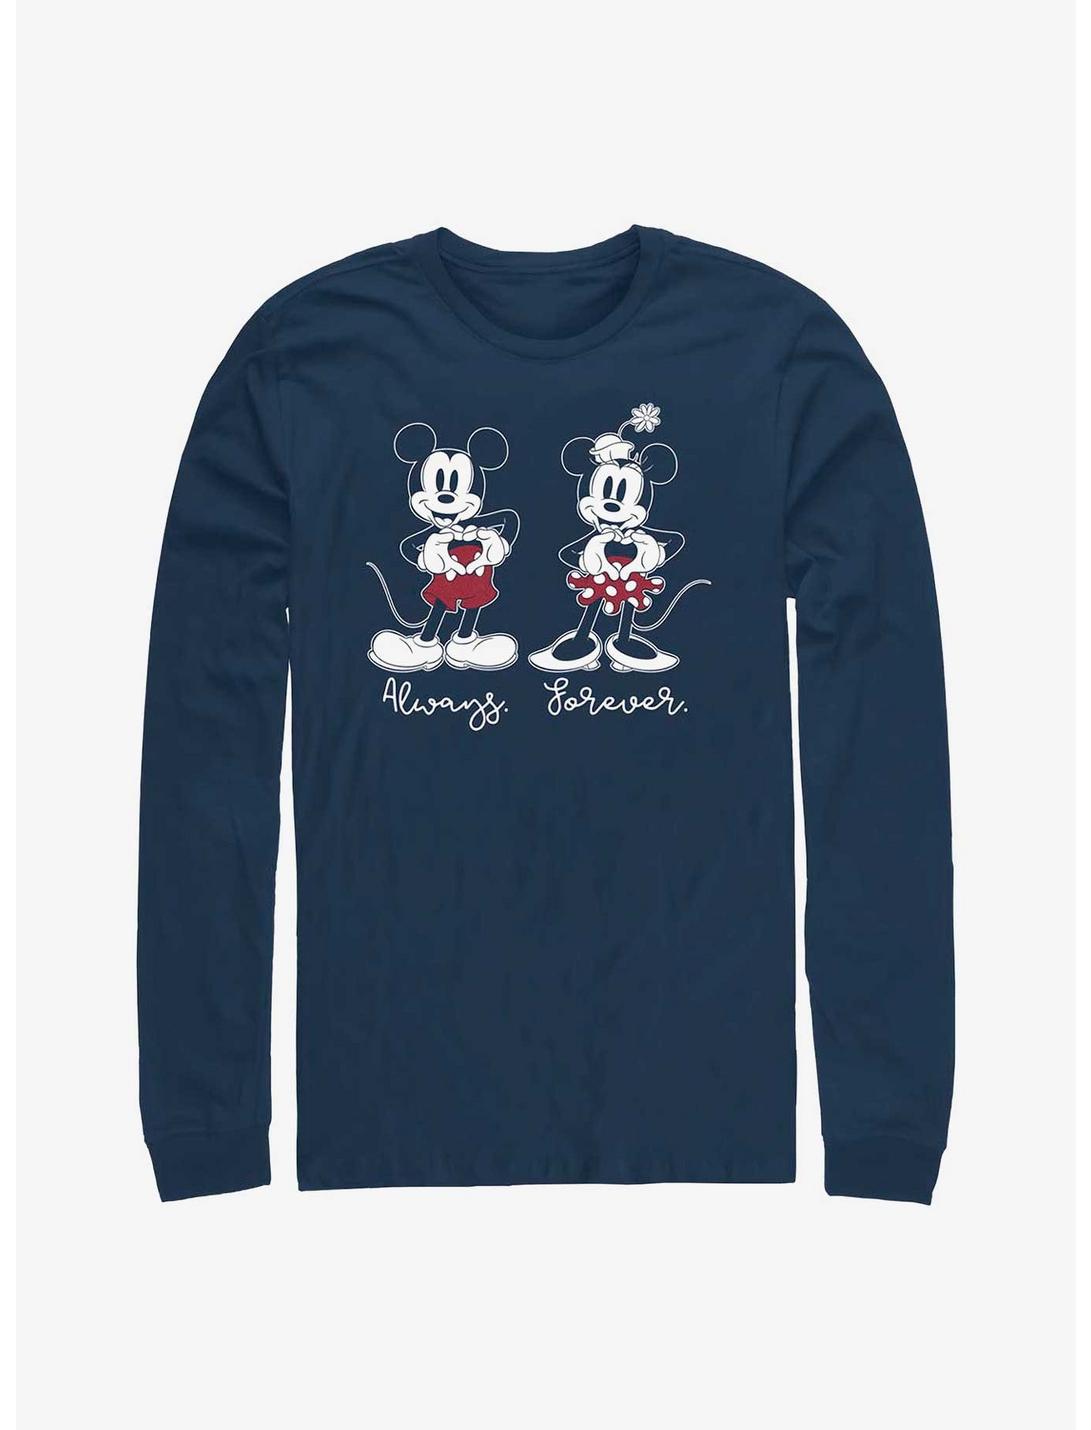 Disney Mickey Mouse & Minnie Mouse Always Forever Long-Sleeve T-Shirt, NAVY, hi-res